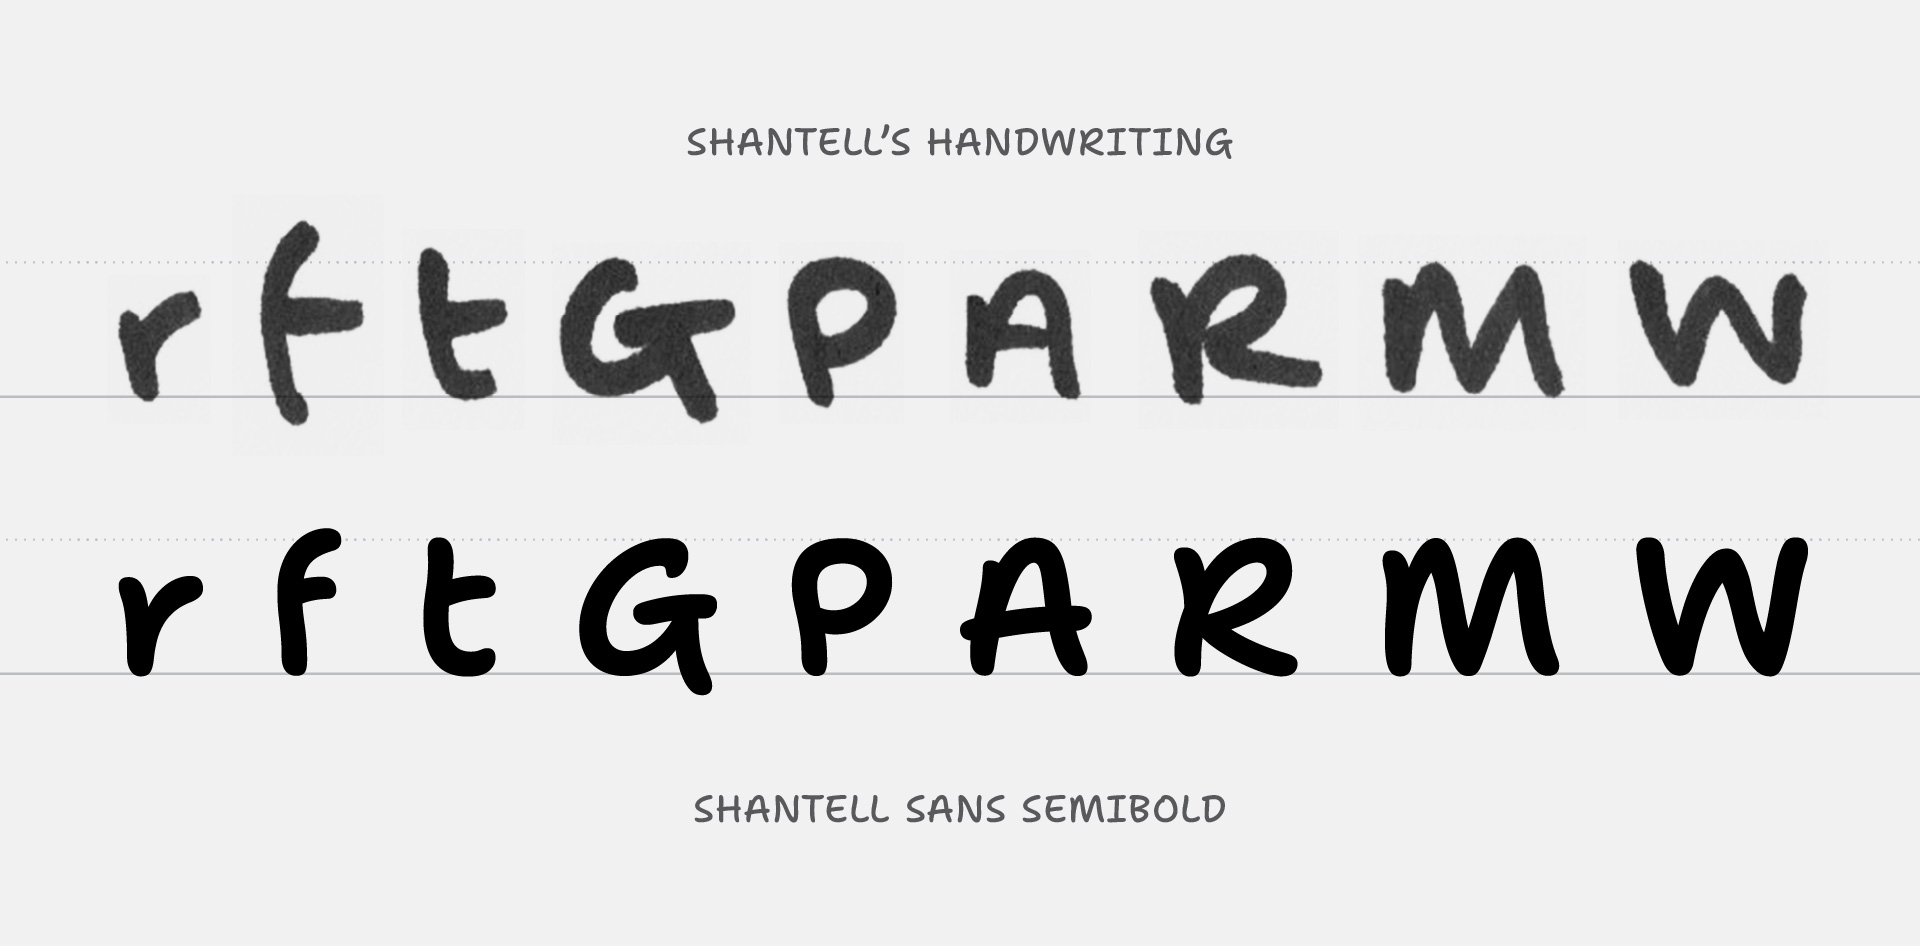 Key letters of Shantell’s handwriting compared to Shantell Sans